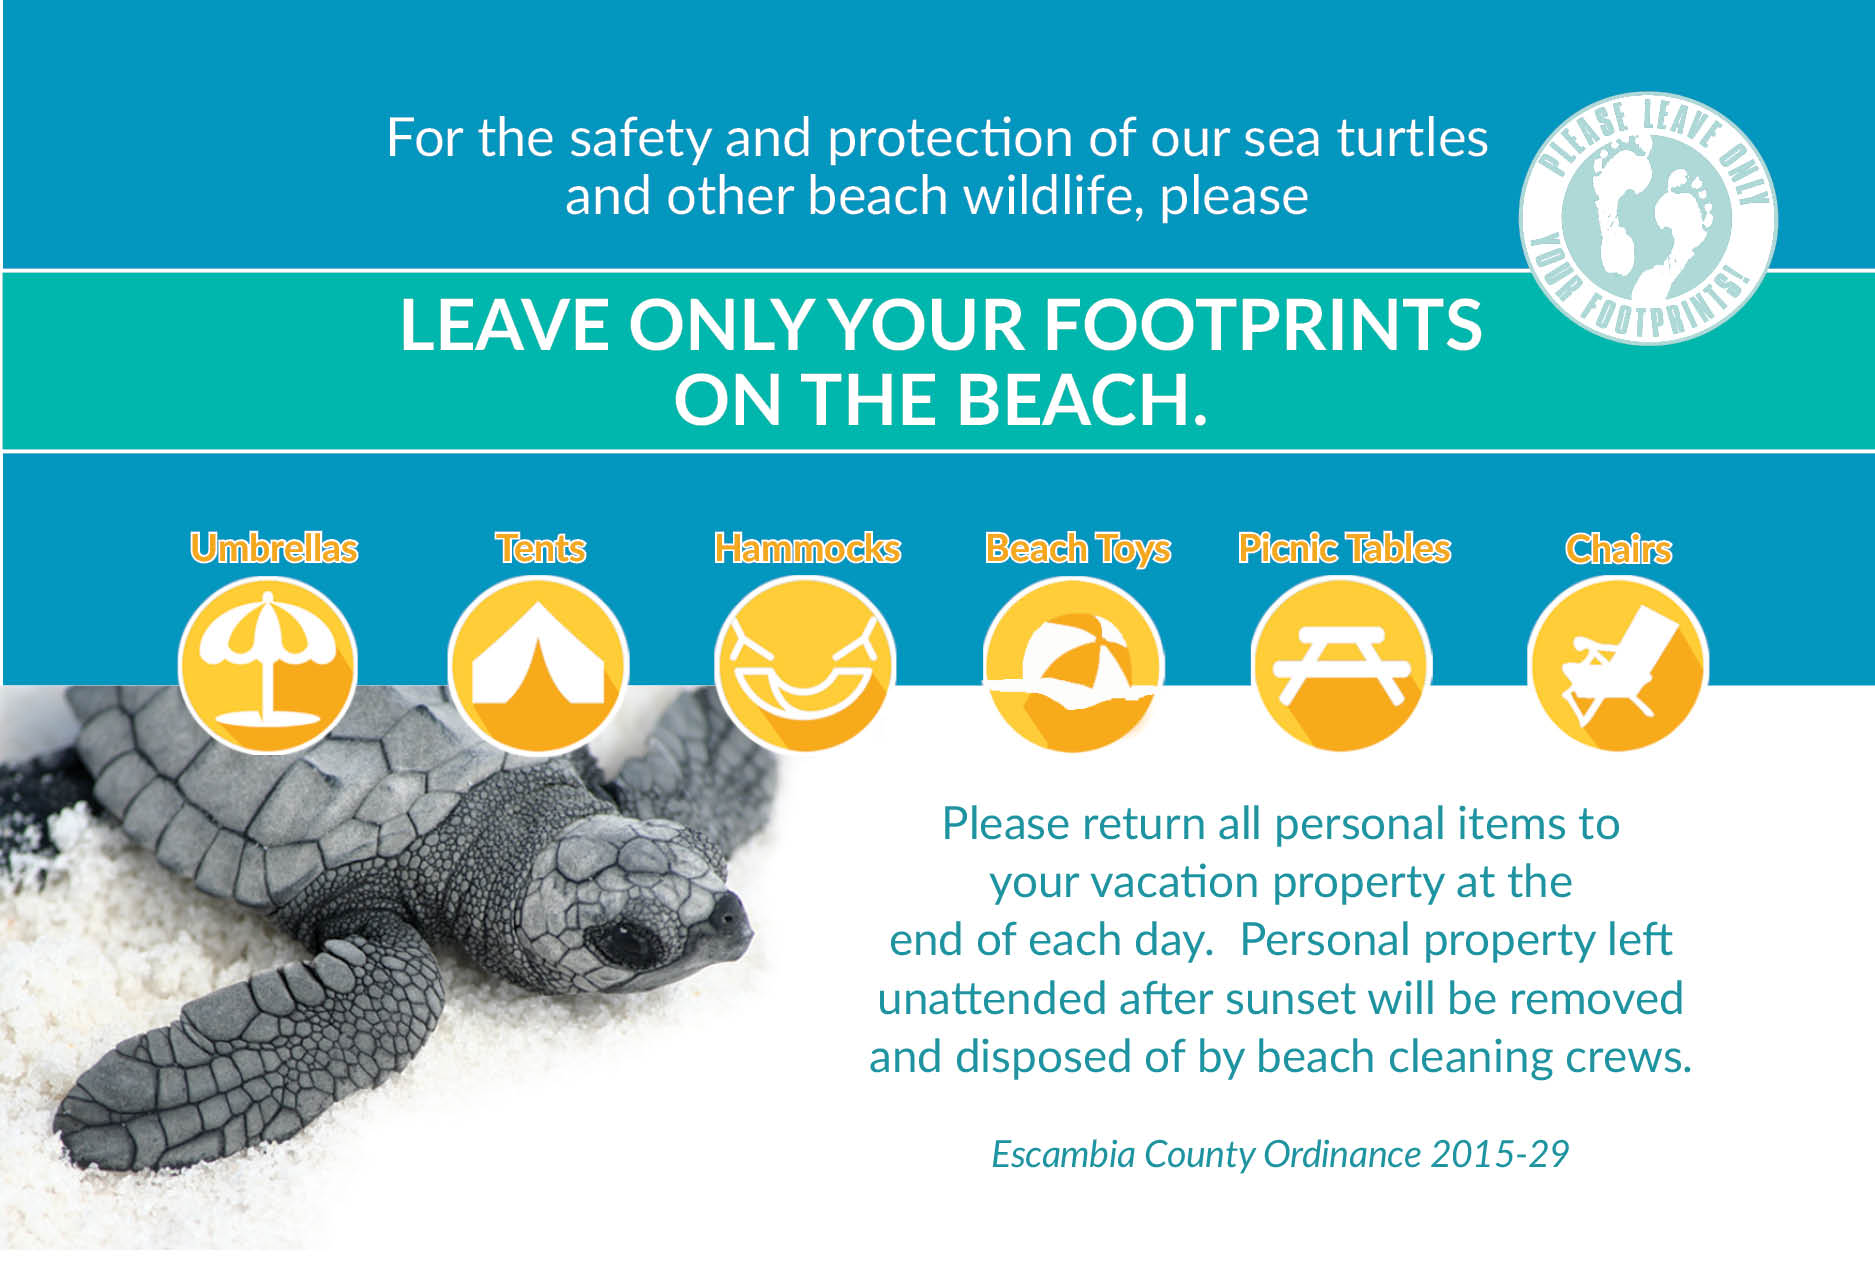 For the safety and protection of our sea turtles and other beach wildlife, please leave only your footprints on the beach.